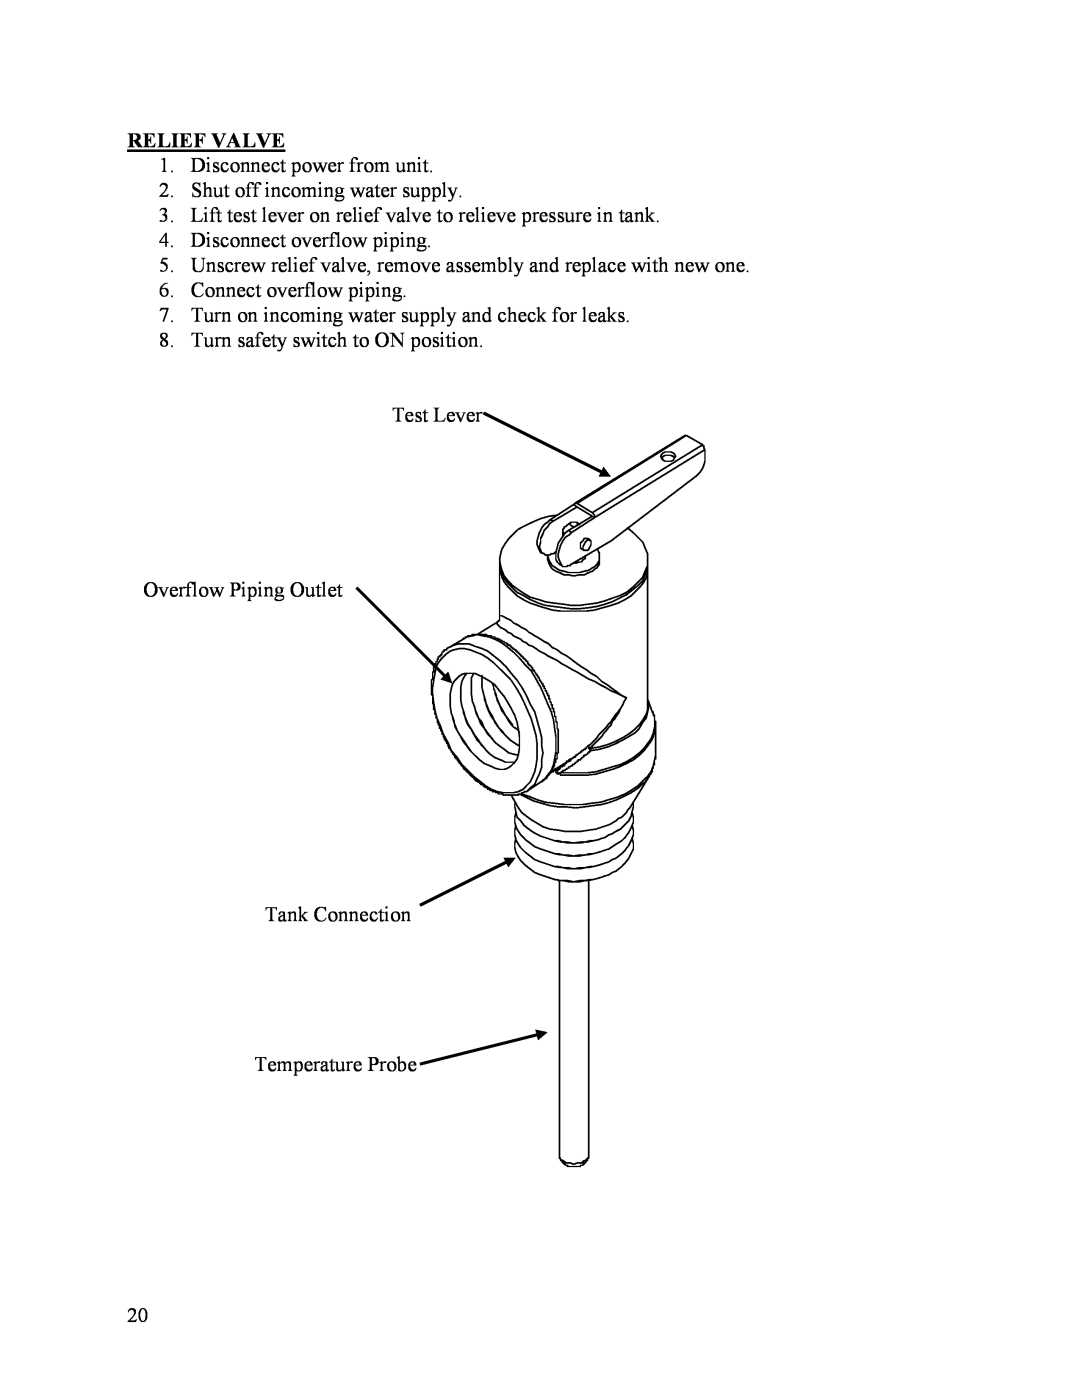 Hubbell Electric Heater Company E manual Relief Valve 